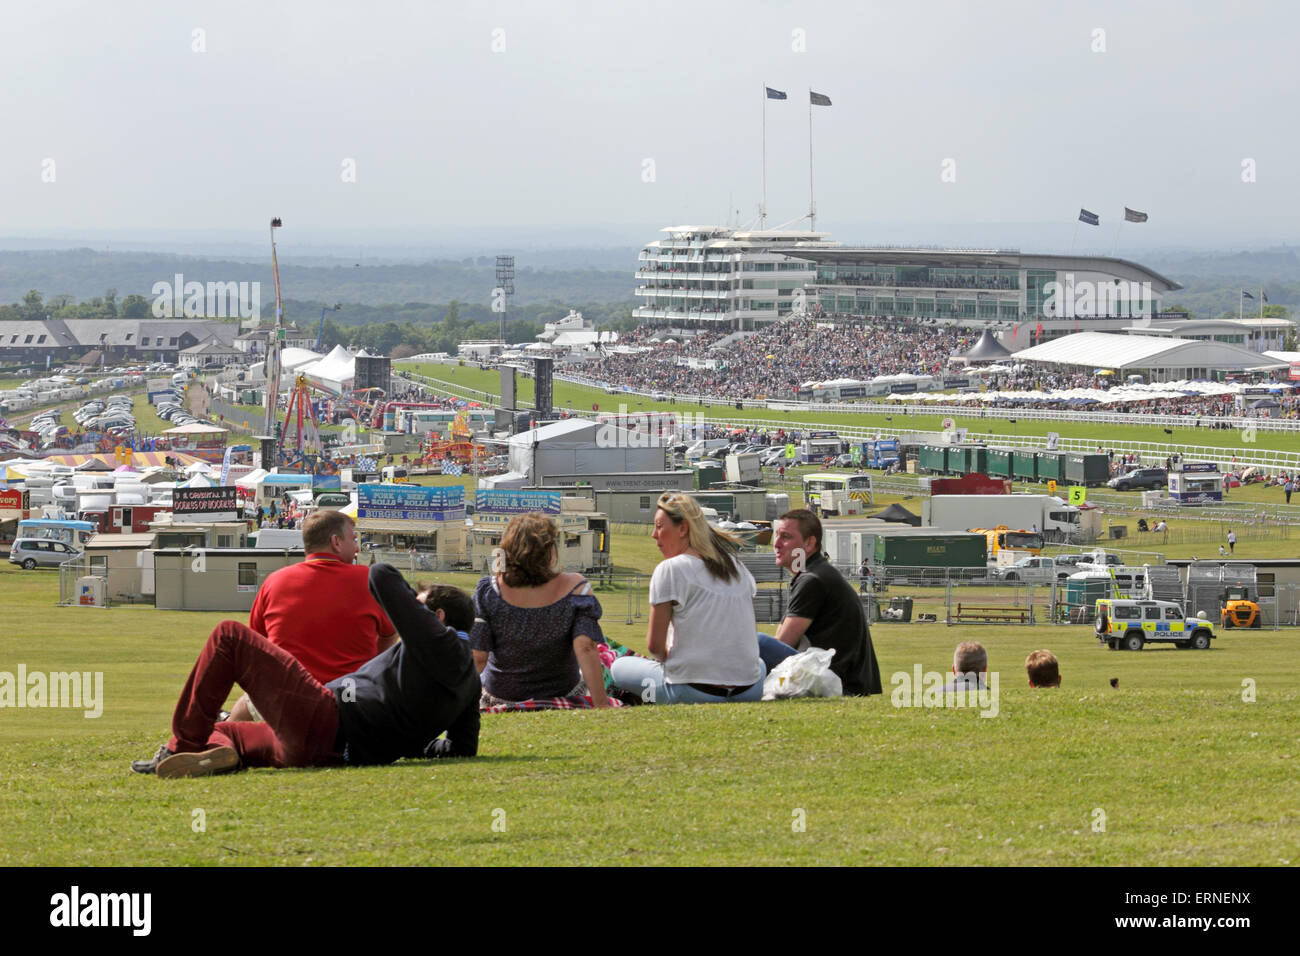 Epsom Downs Surrey UK. 5th June, 2015. It was Ladies Day 2015 at Epsom, with the highlight of the day being the Investec Oaks (Fillies' Group 1, Class 1), run over a distance of 1m 4f 10y. The 5/2 favourite No. 8 (orange and blue colours) Legatissimo was beaten into second place by the photo finish winner, No 9 (red and yellow colours) and 20/1 outsider Qualify, ridden by C O'Donoghue and trained by A P O'Brien. Spectators on the mound at Tattenham Corner with a free view of the the whole course. Credit:  Julia Gavin UK/Alamy Live News Stock Photo